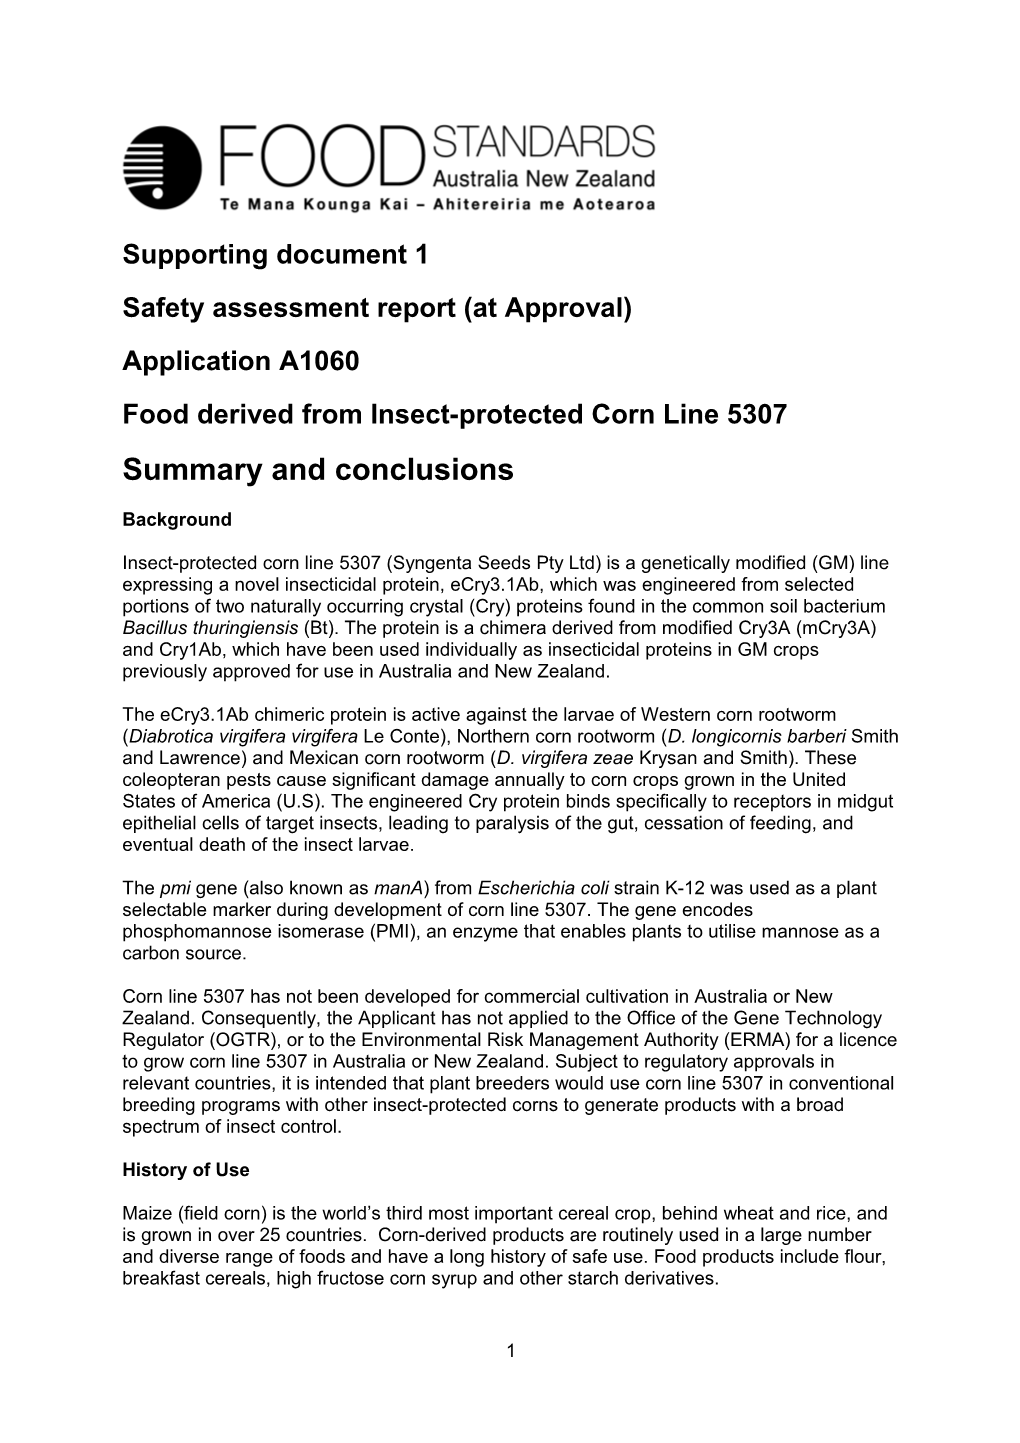 Food Derived from Insect-Protected Corn Line 5307